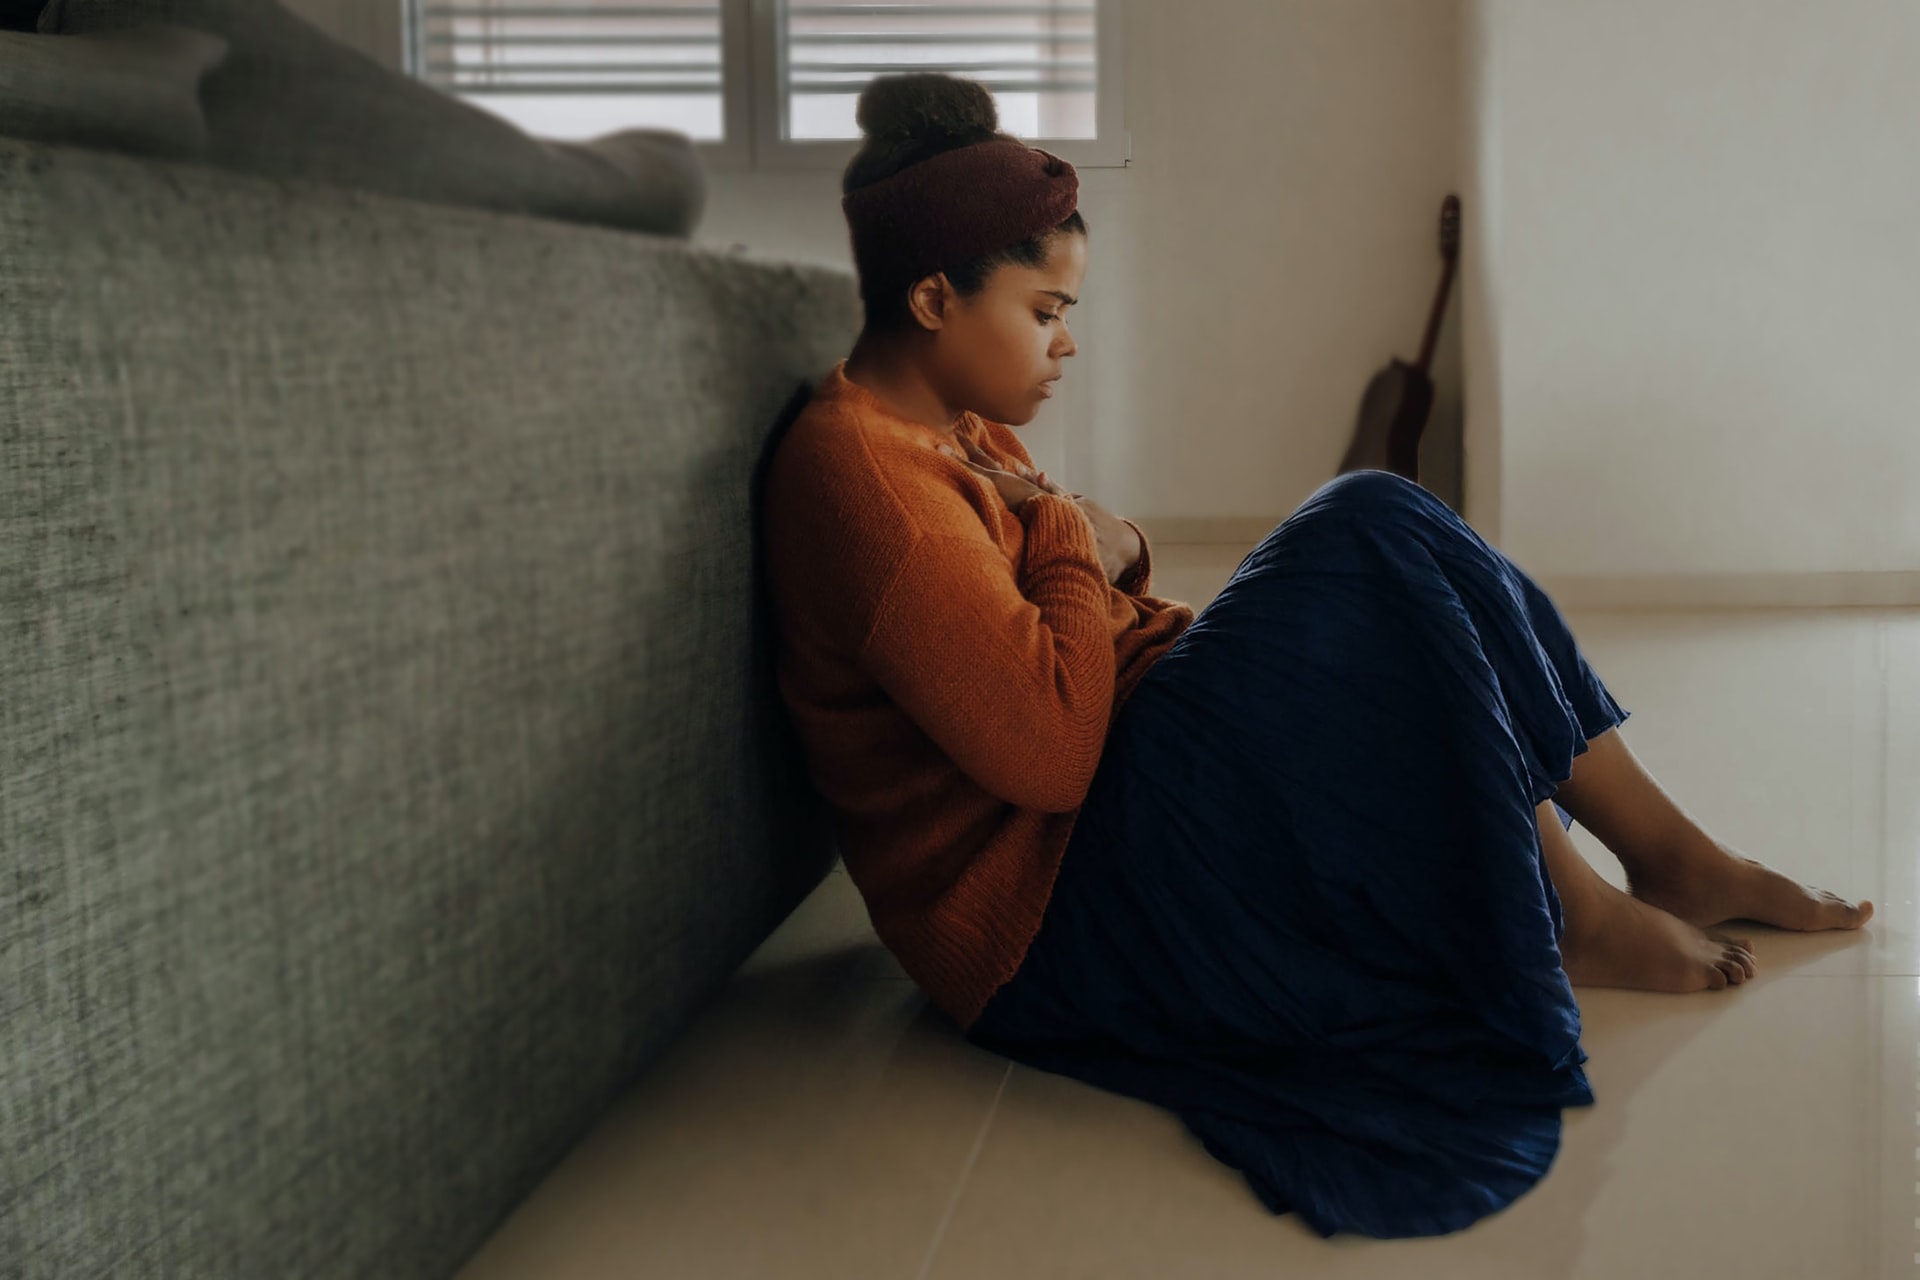 A woman in orange and blue sits on the floor forlornly